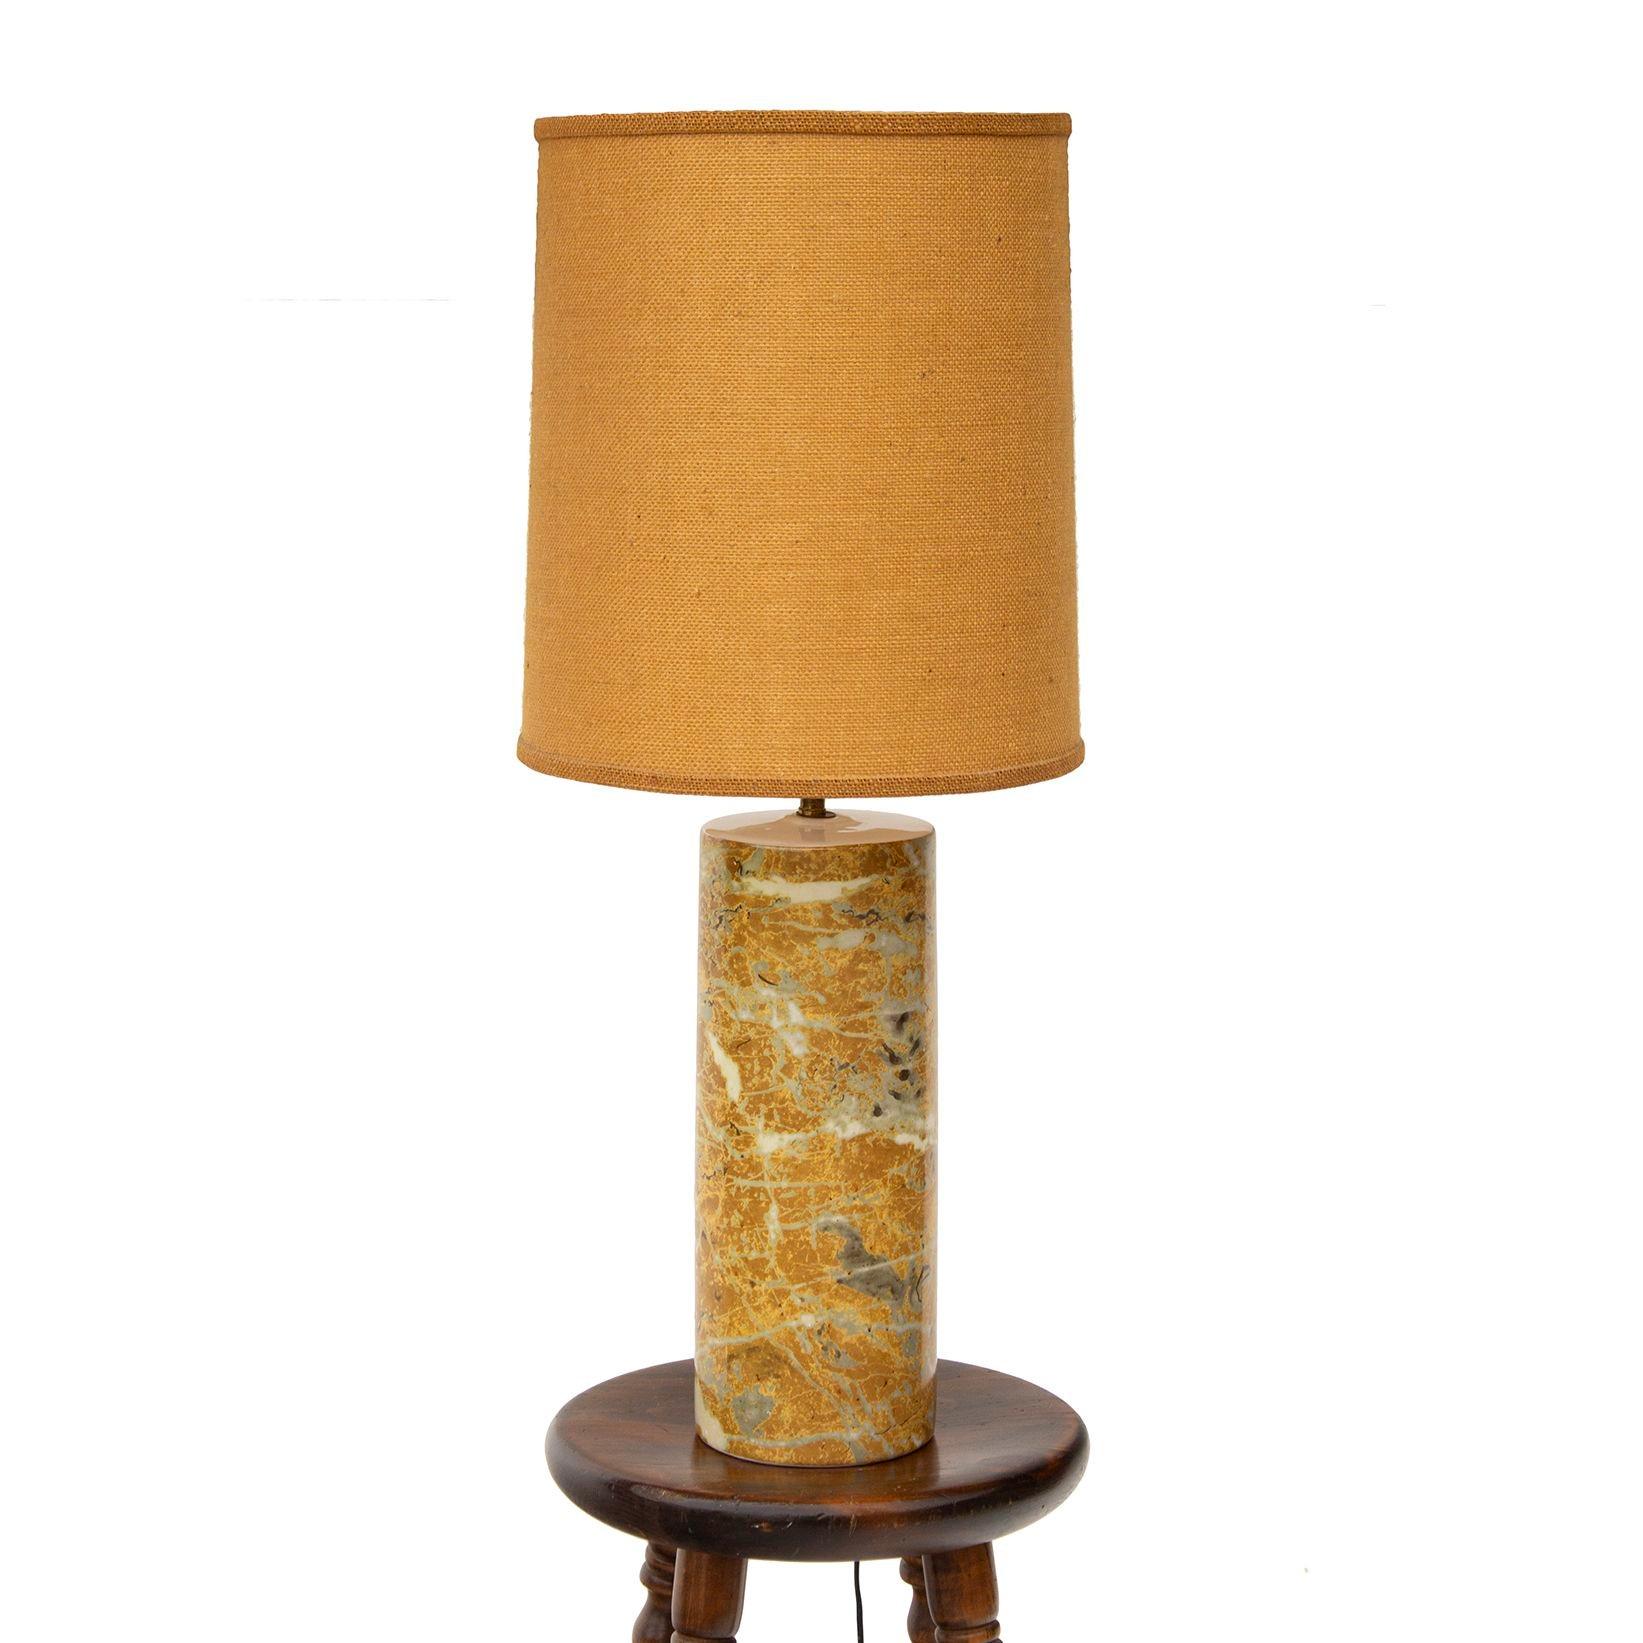 USA, 1970s
Cylindrical Ceramic Table Lamp in Faux Marble with natural tweed drum shade. Estate purchase, interesting design as the marble look appears applied to the column of the lamp, yet only when the seam can be seen from the back. Great